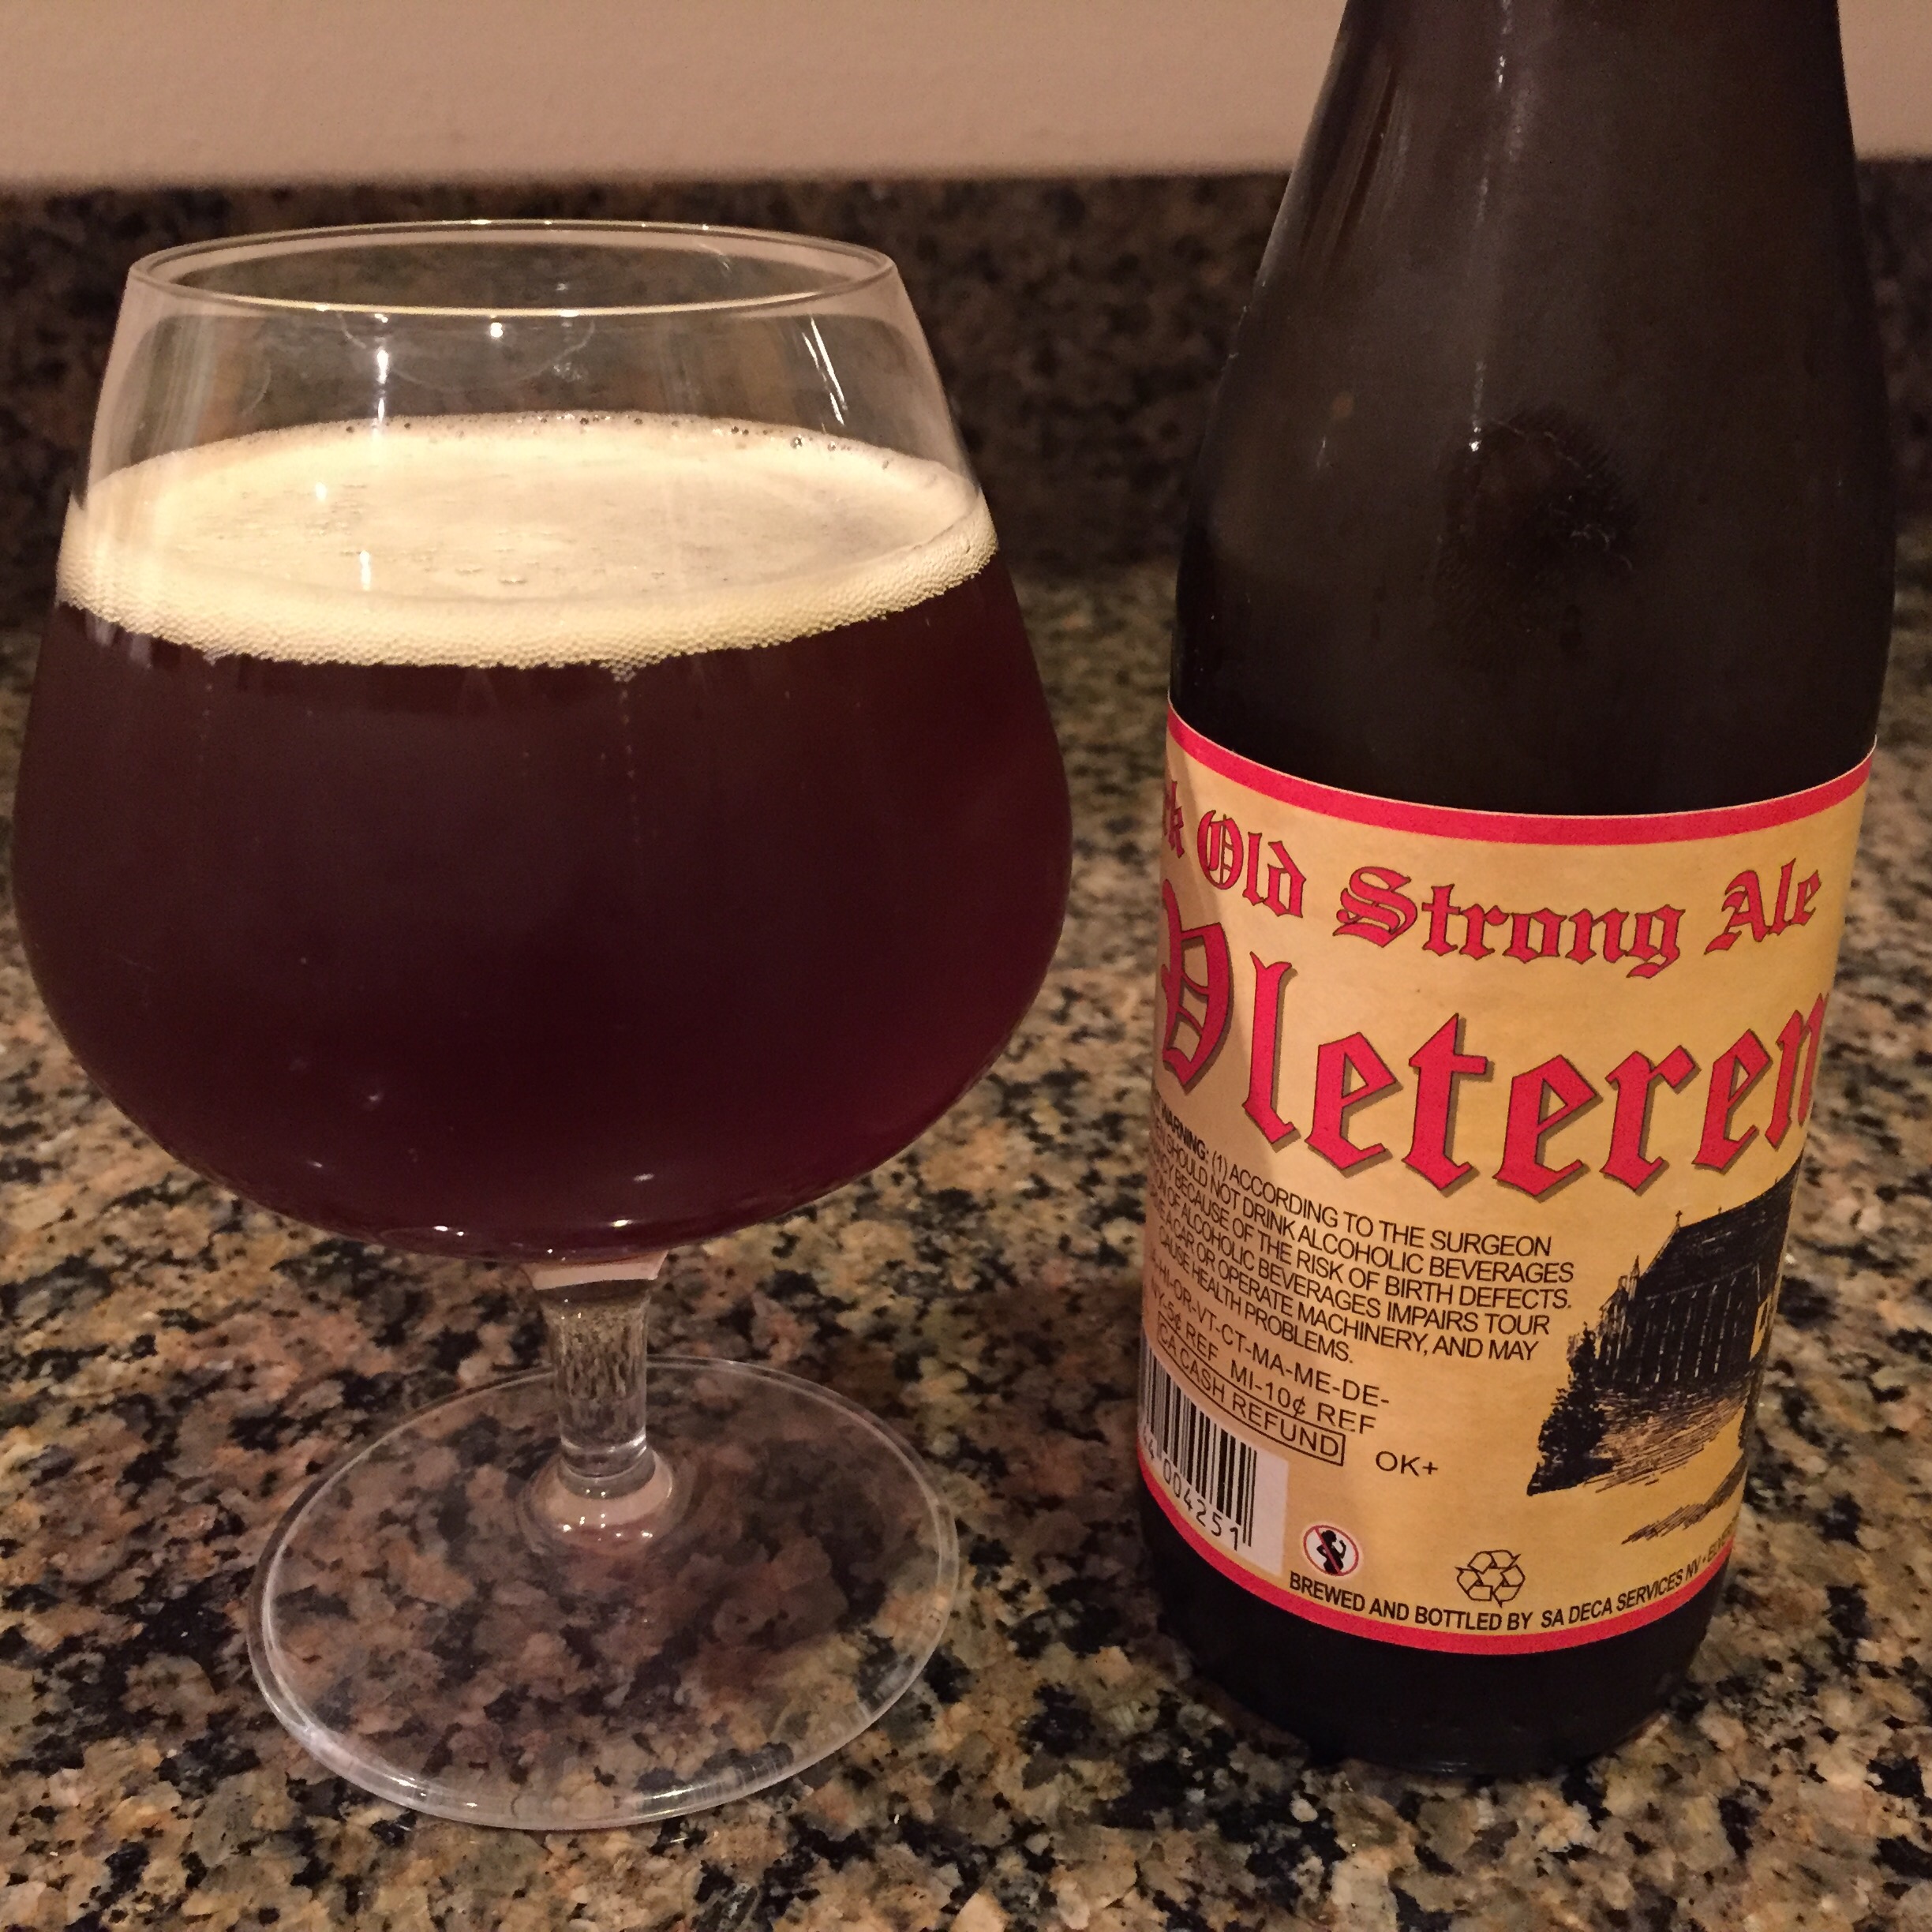 Vleteren – Dark Old Strong Ale by Deca Services